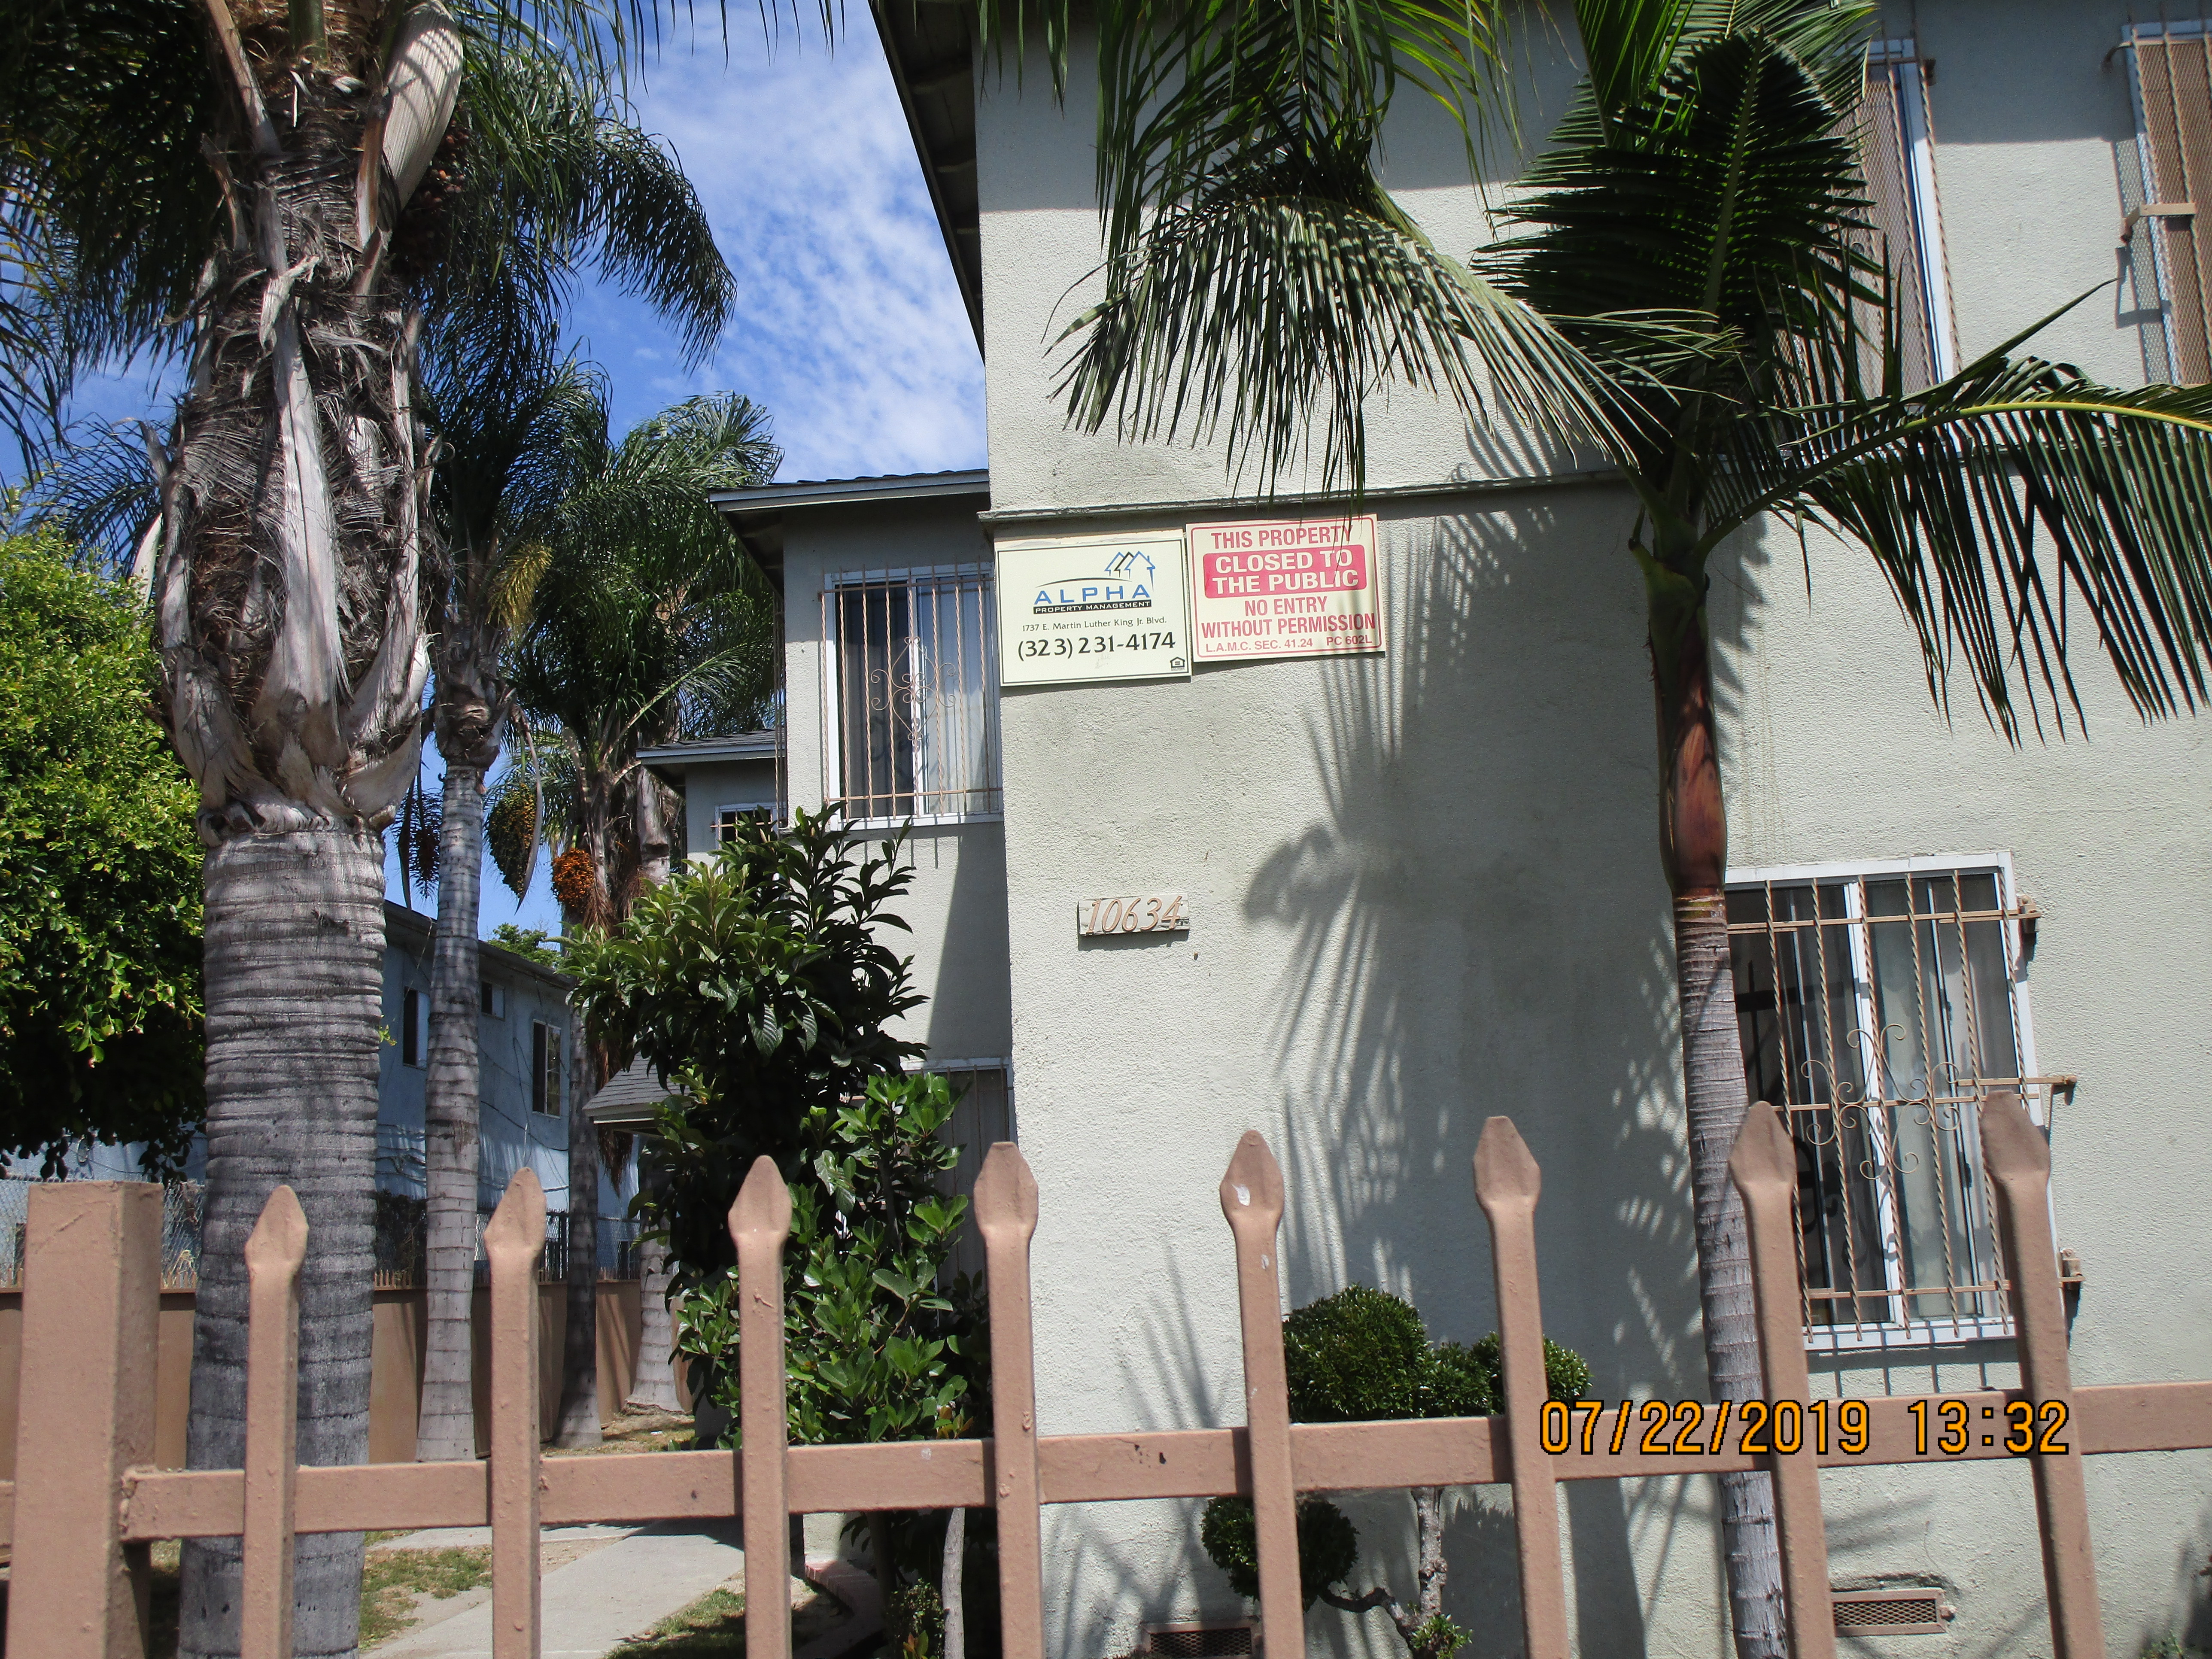 Close up view of the property with Palm trees to one side